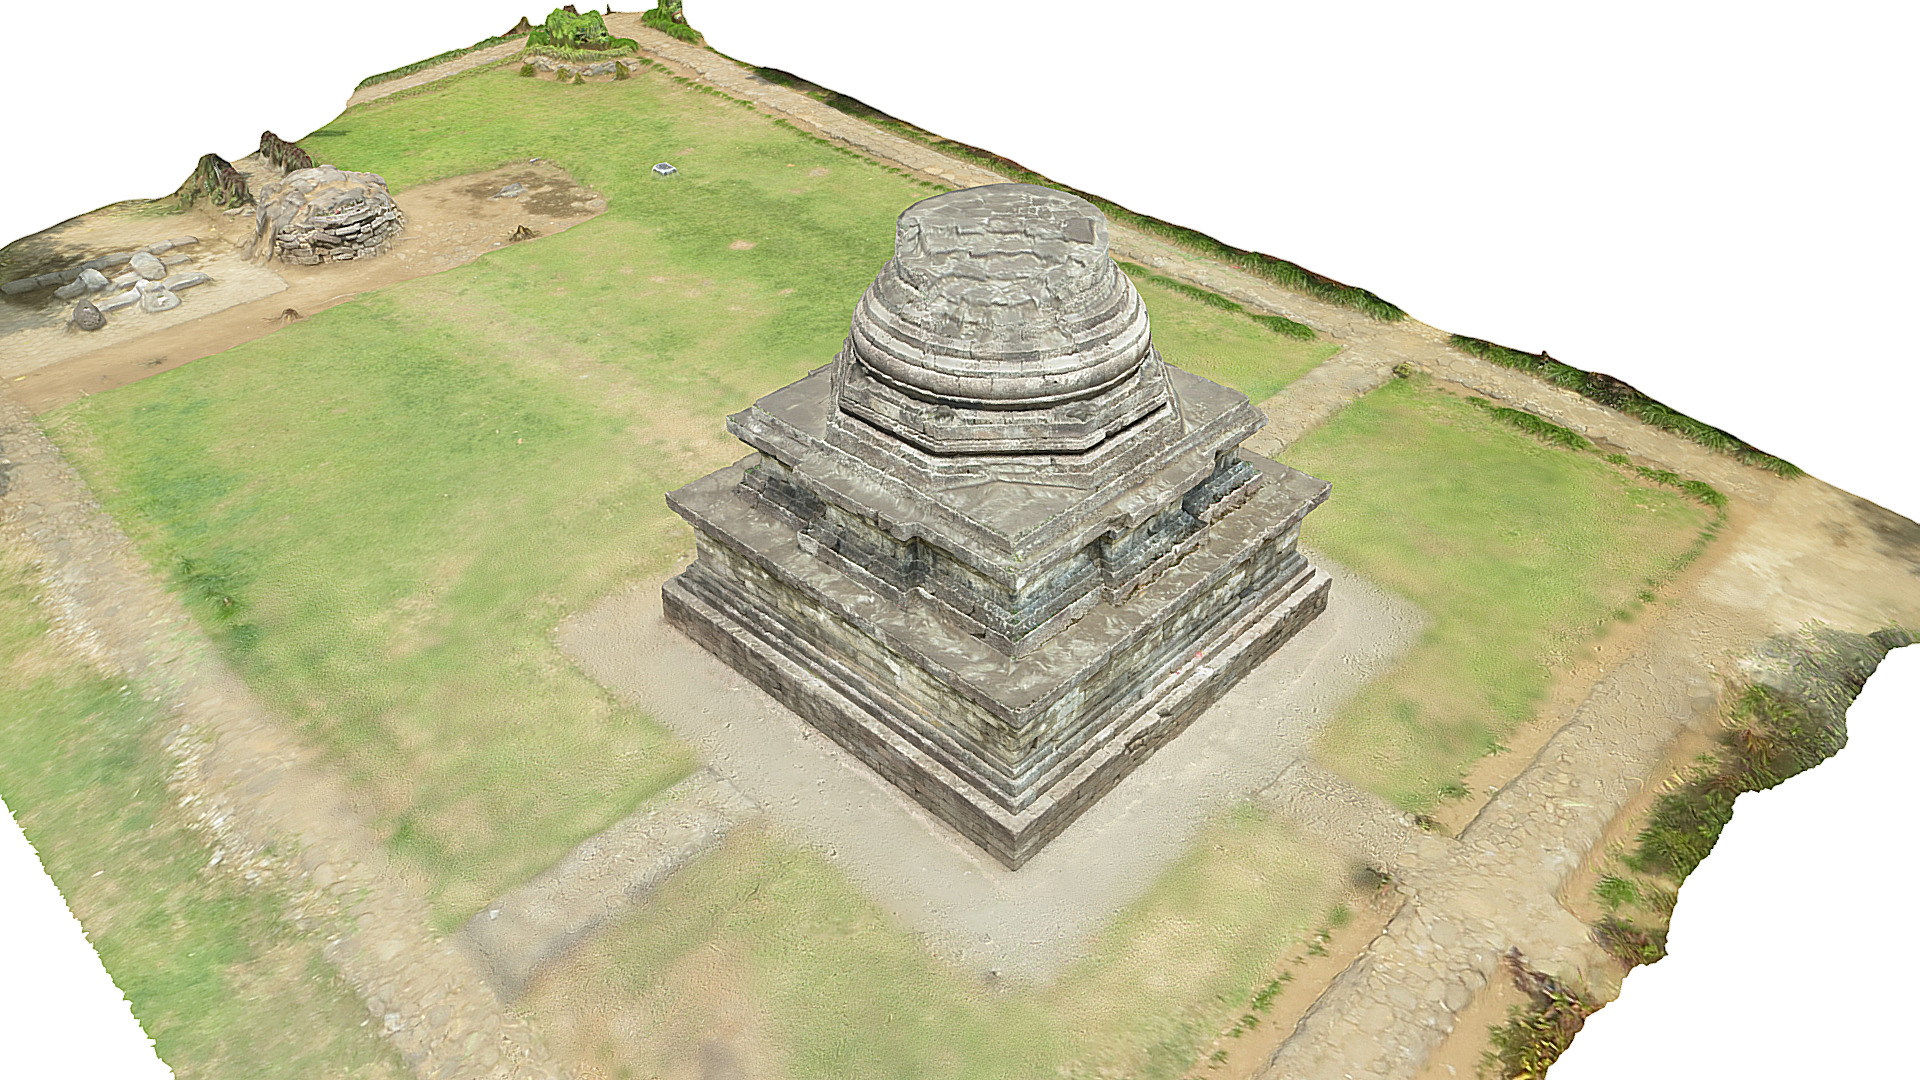 3D model Candi Sumberawan - This is a 3D model of the Candi Sumberawan. The 3D model is about a stone structure on a grassy hill.